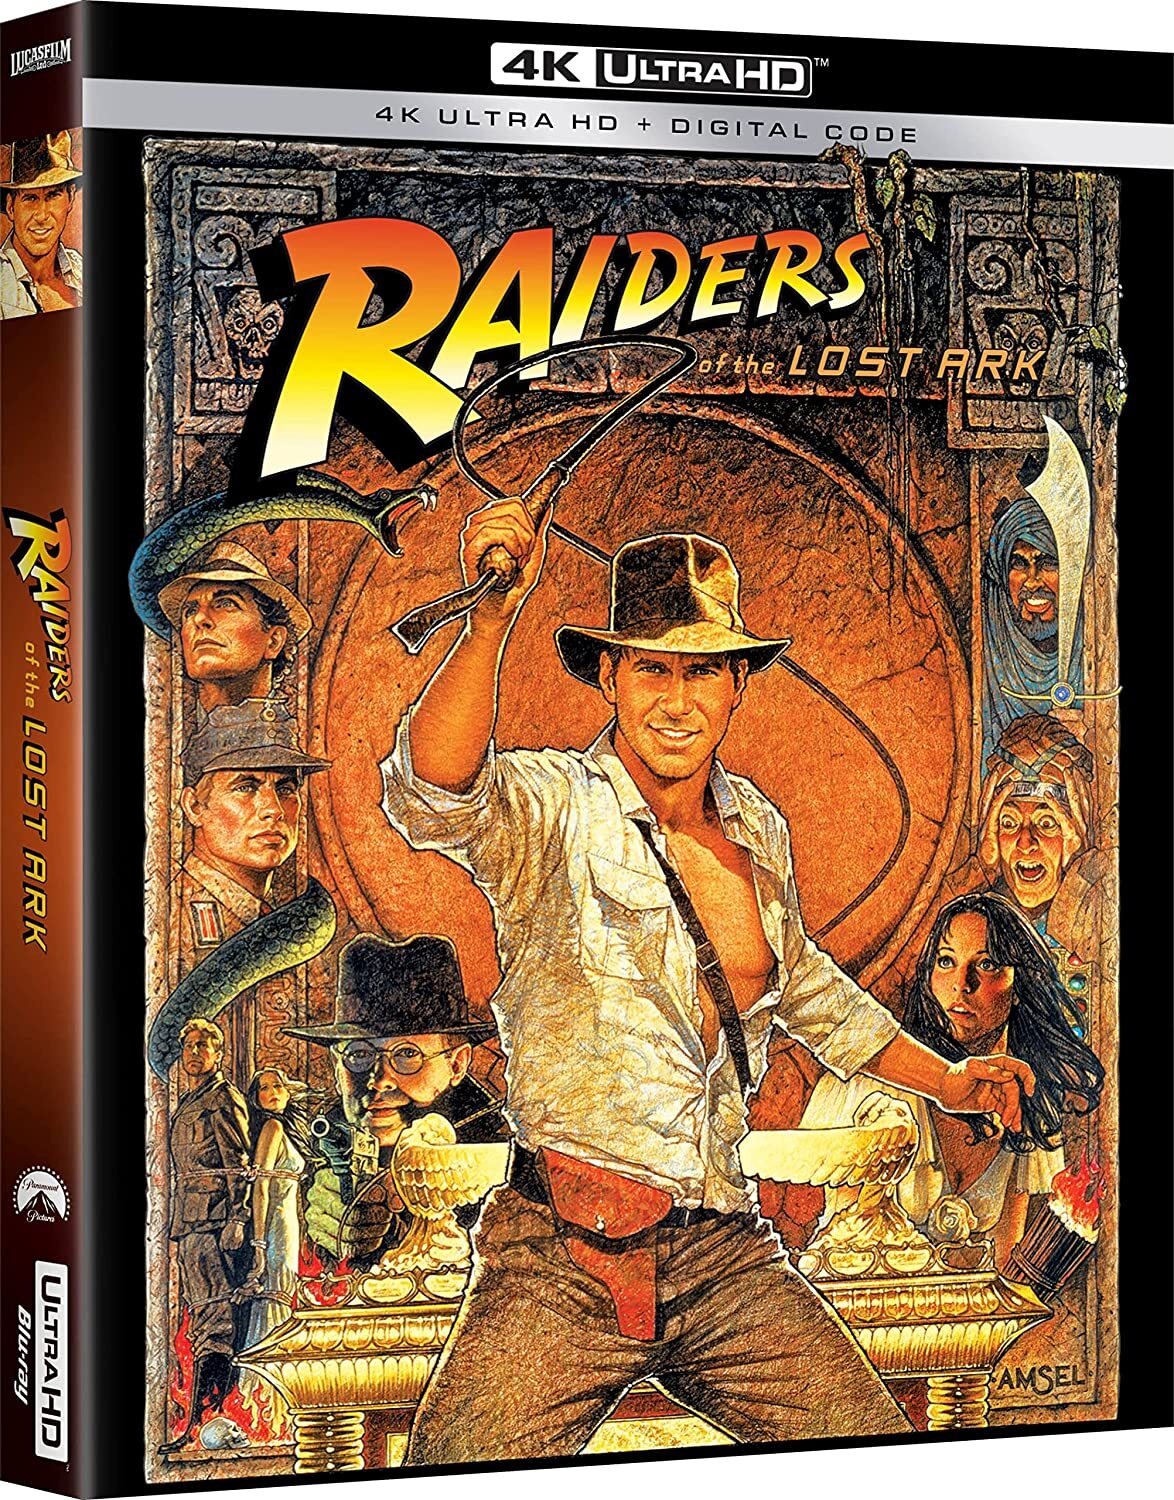 Indiana Jones and the Raiders of the Lost Ark 4K